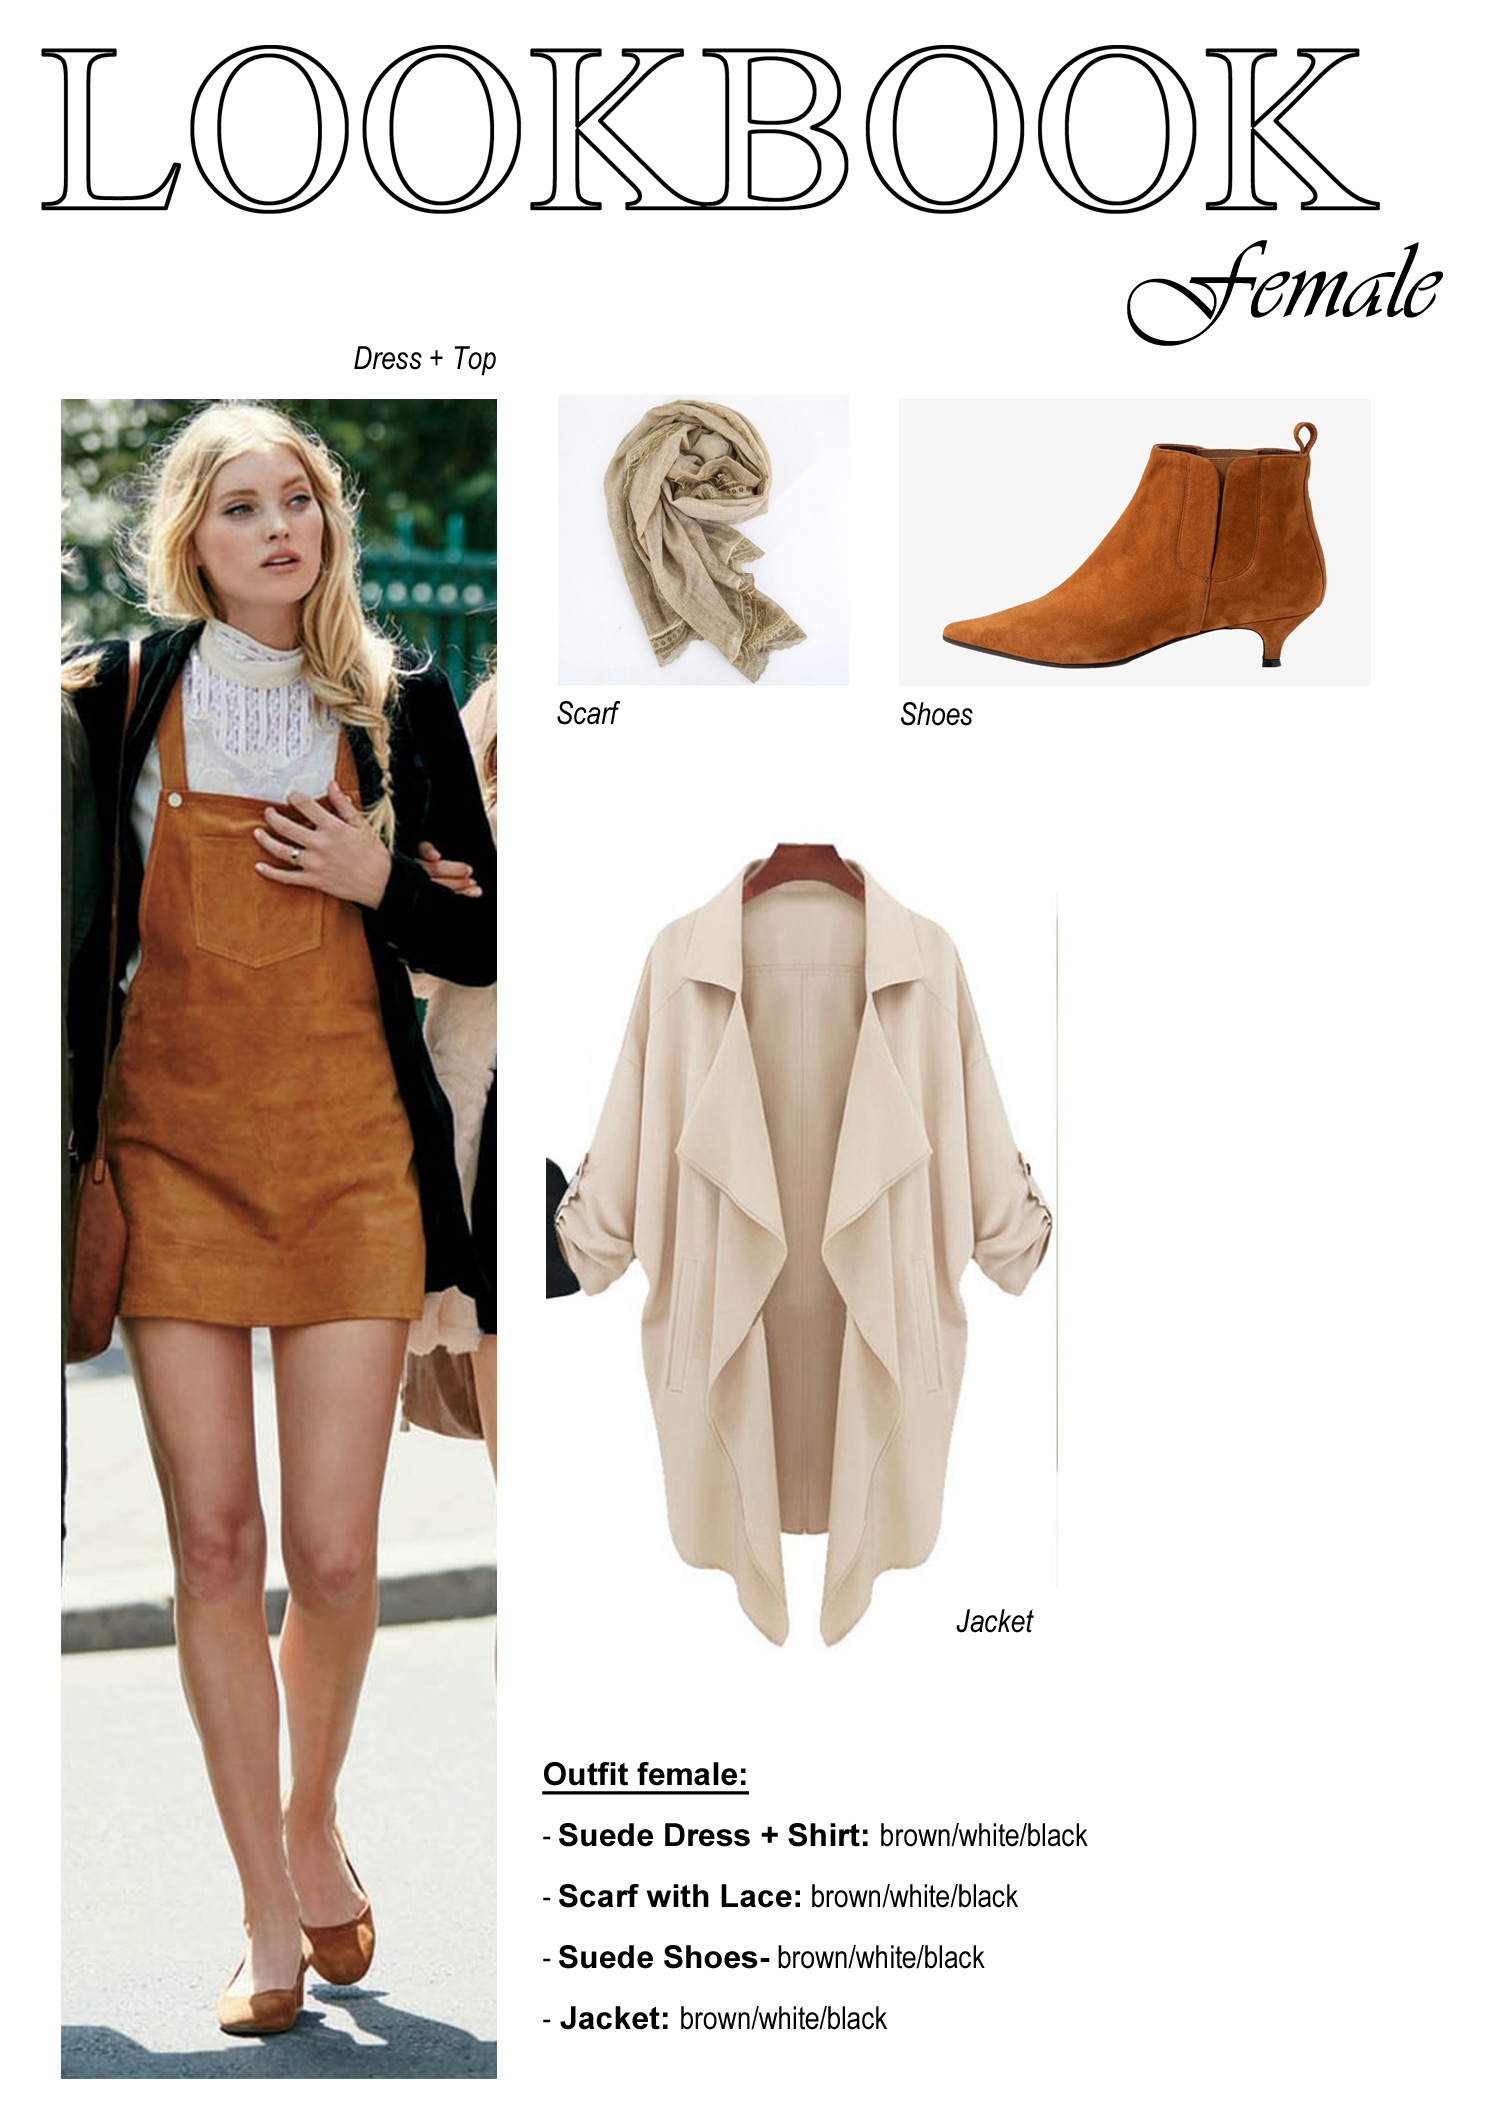 Female Outfit Look Book Example